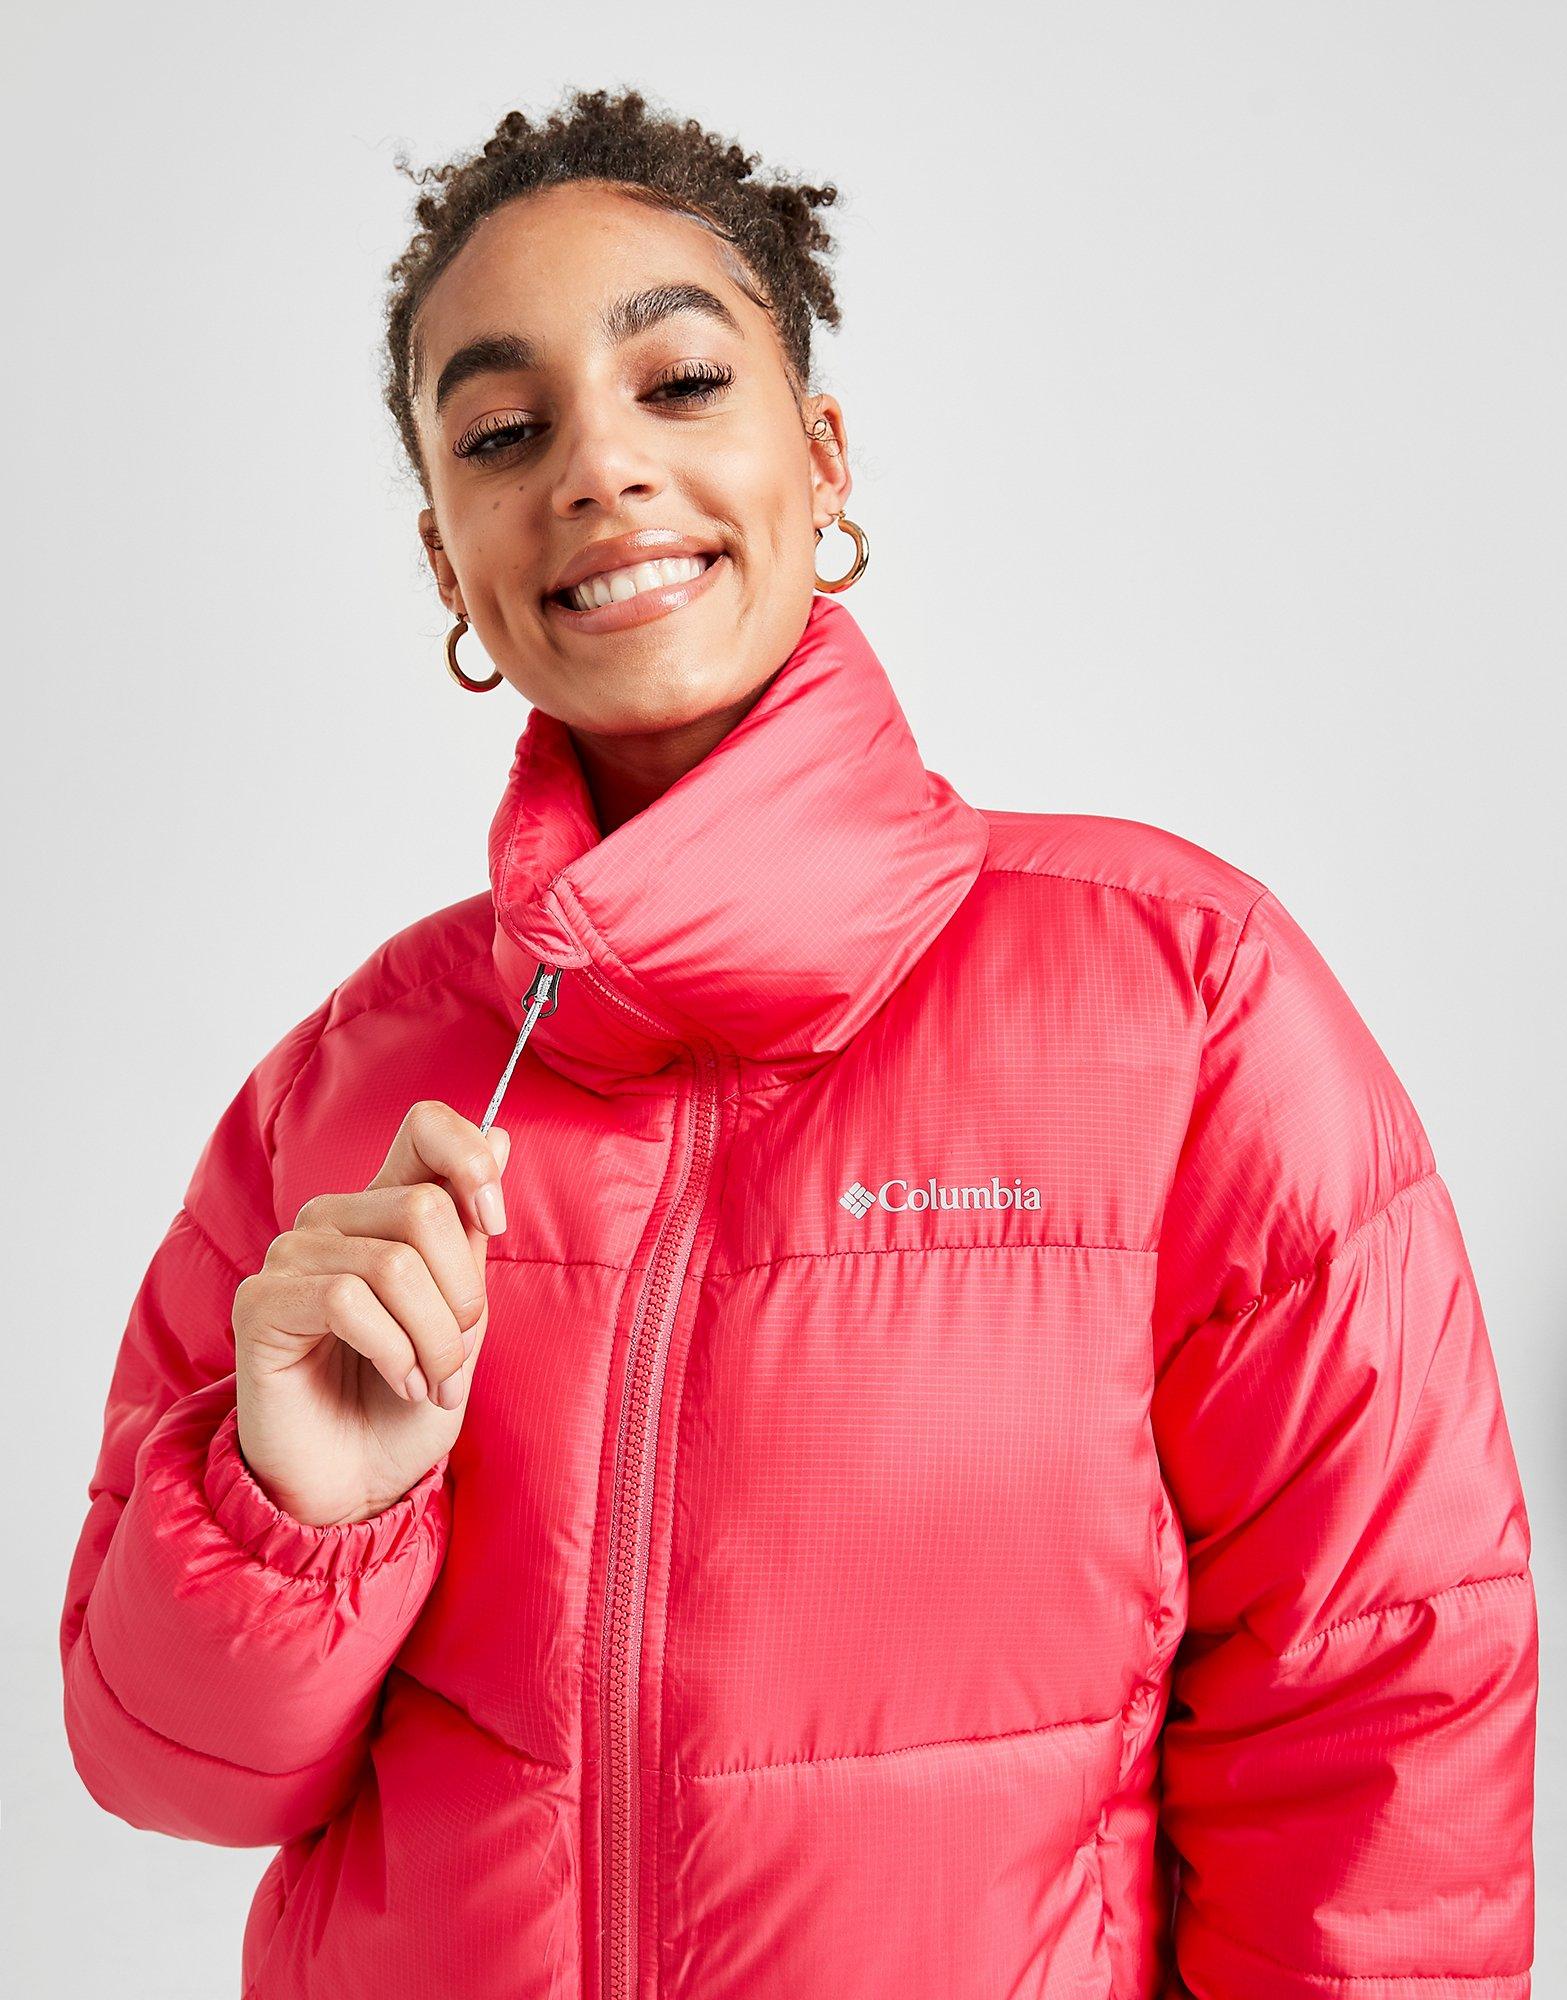 red columbia jacket